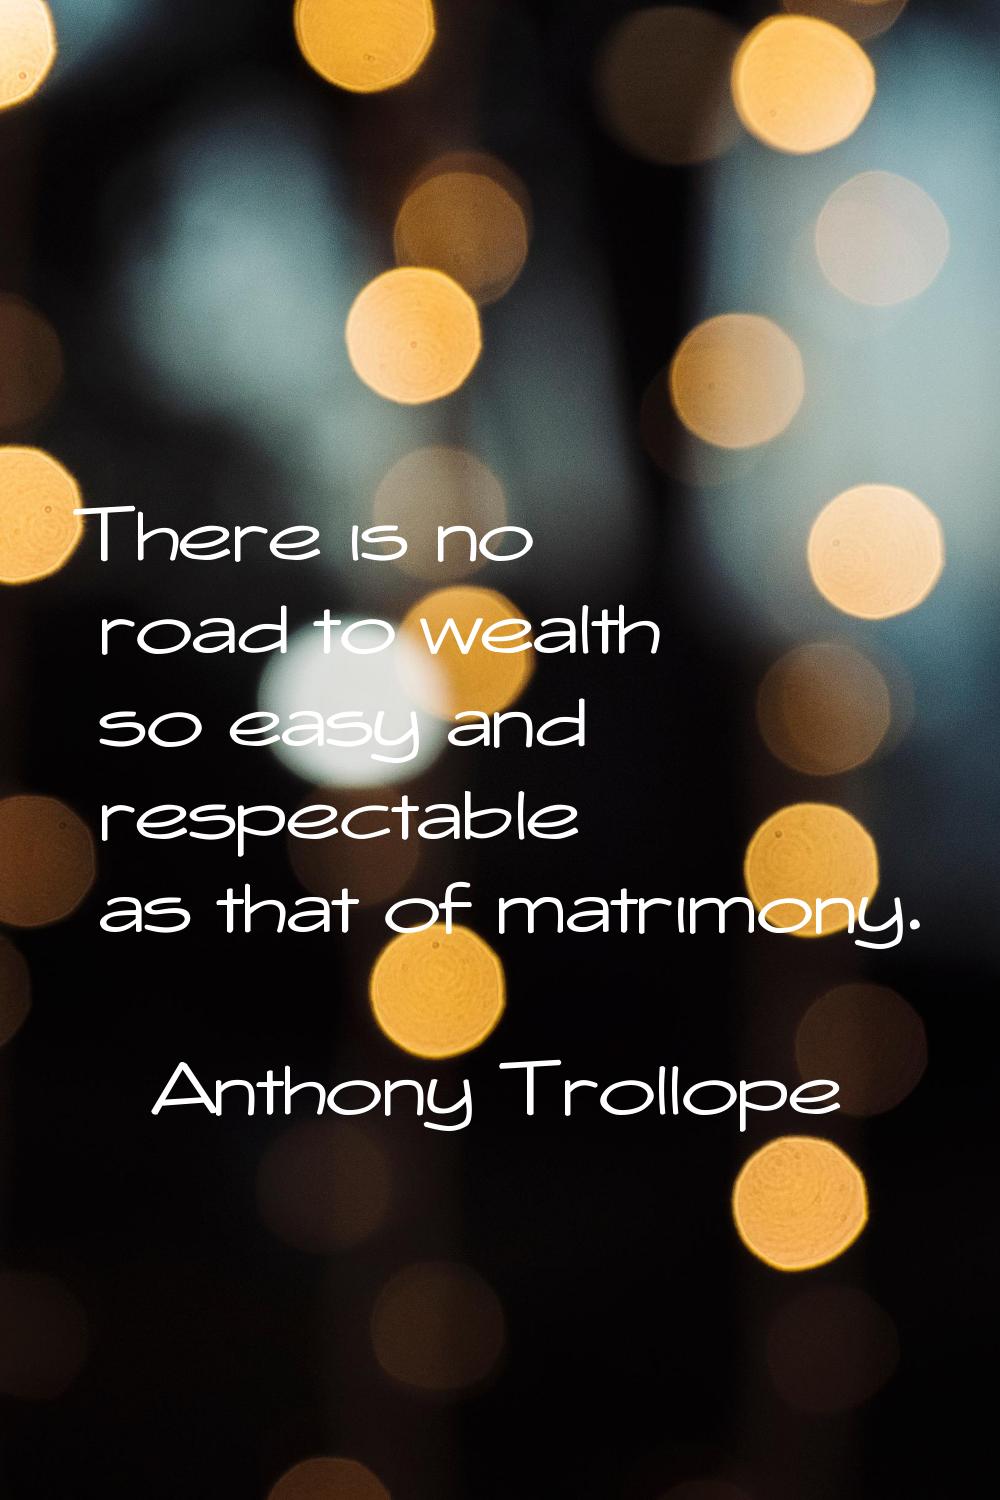 There is no road to wealth so easy and respectable as that of matrimony.